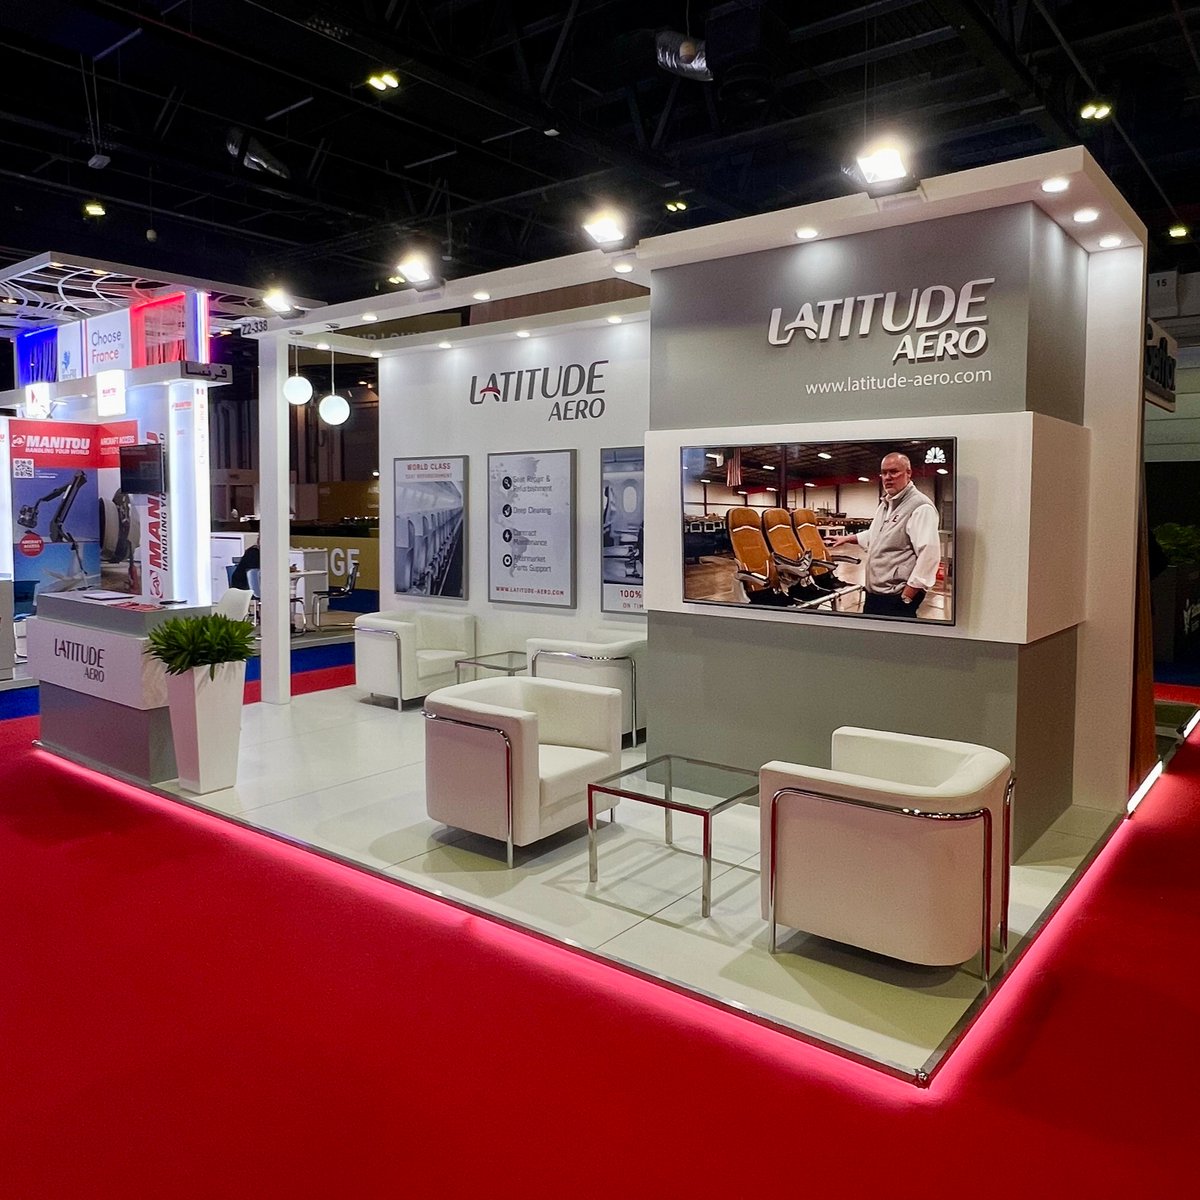 Latitude Aero is here and ready for the first day of Aircraft Interiors Middle East! Don't forget to stop by Stand 338 to say hello ✈️ #AIME2024 #AIME #paxex #avgeek #mro #aviation #Dubai